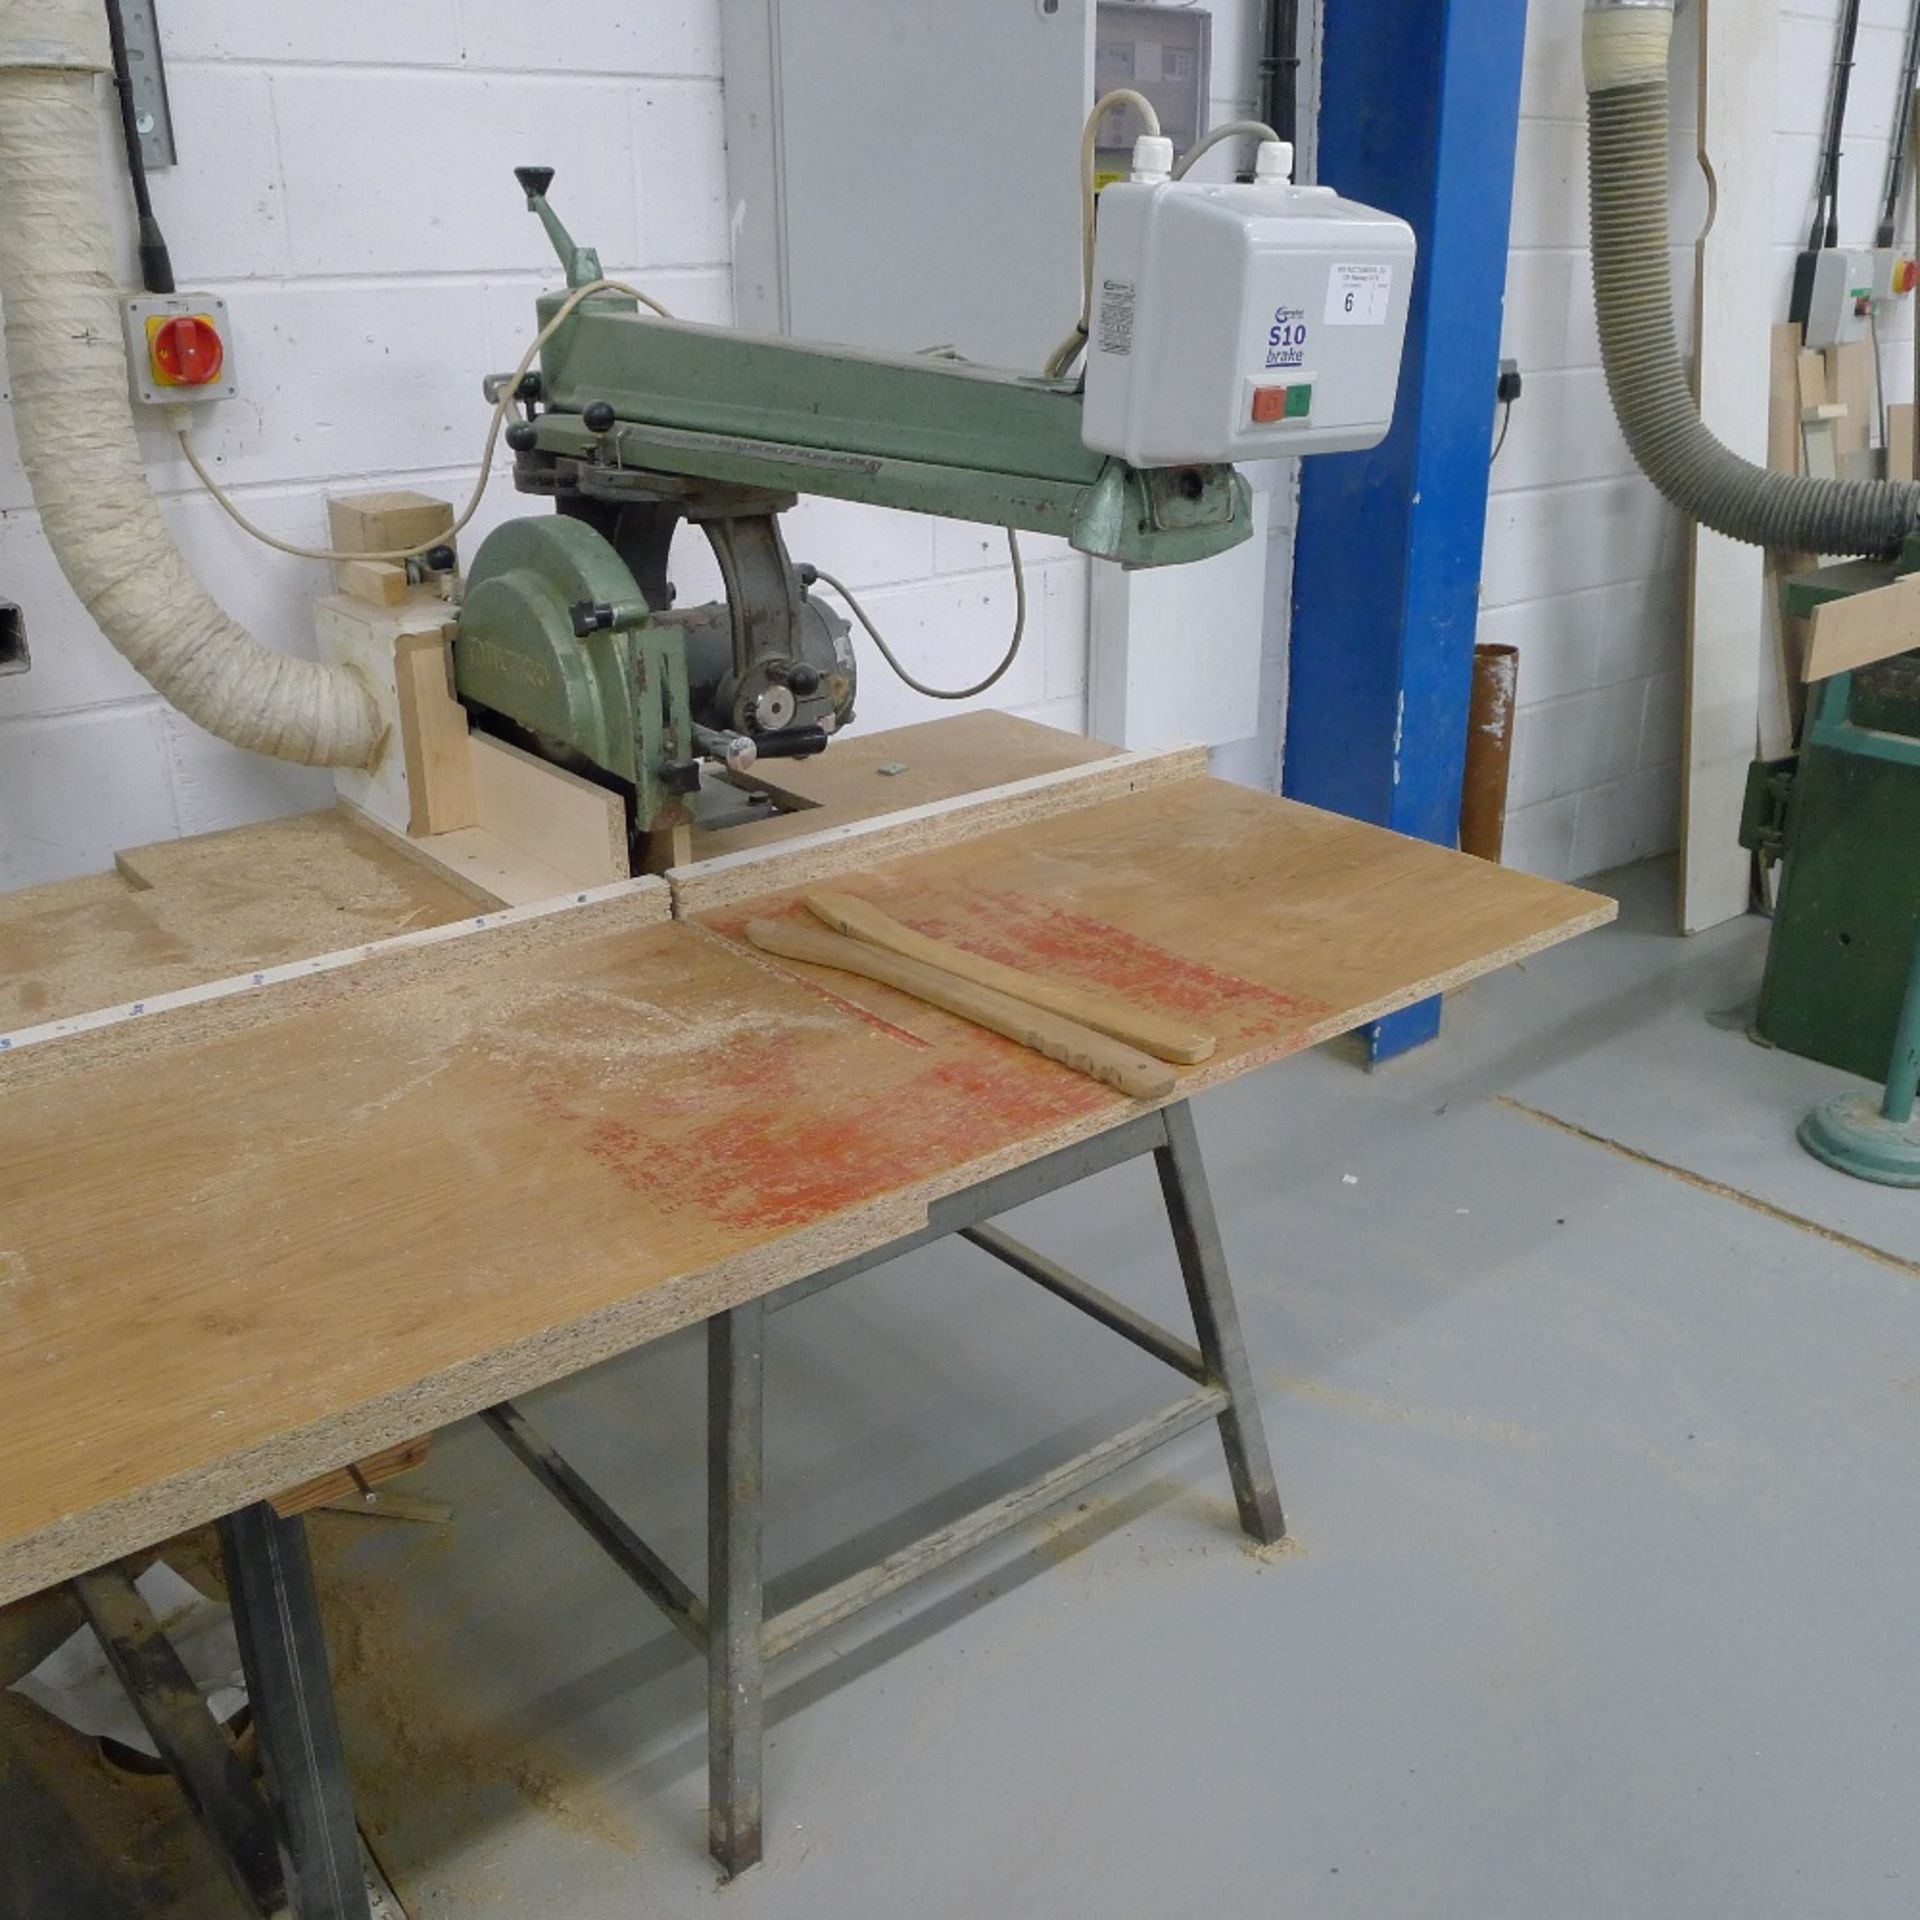 1 radial arm cross cut saw by Multico type 02/3, s/n 1146, 3ph, also included is the store rack / - Image 2 of 5